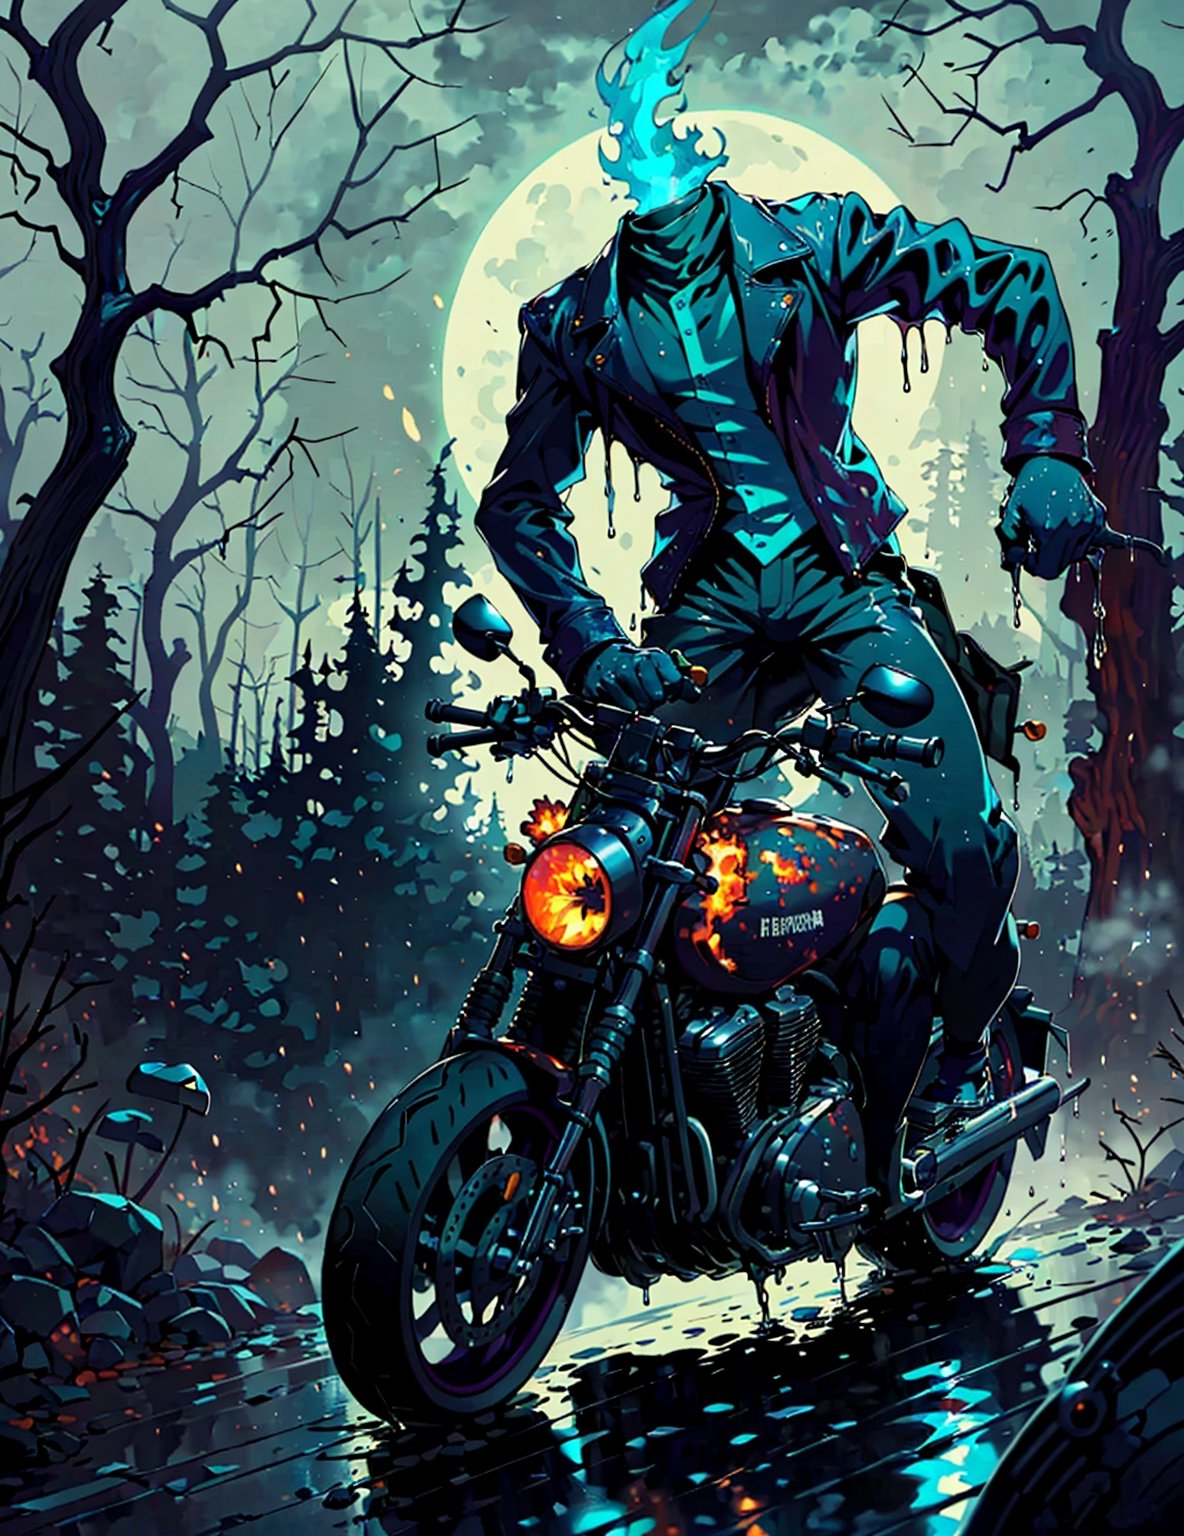 (((a headless horseman))) he rides a burning 1930 Harley Davidson motorcycle down a wooded highway on a dark night. Wearing a leather jacket,(((No head)))(((decapitated)))(((headless)))(((no helmet)))(((empty neck hole)))(((The motorcycle has the an iron horse head welded to the front, it's eyes serve as headlights))),(holding a machete)

 (((Drippy, burnt ember asthetic))), ((gnarly spooky trees)), autumn leaves, (((green fog))), crescent moon, ((weird mushroom men in the background))

(((an iron horse head is welded on to the front of motorcycle, (rider has no head, he is decapitated, he is headless),))),halloweentech,art by Stephen Gammell,fire that looks like...,HellAI,horror